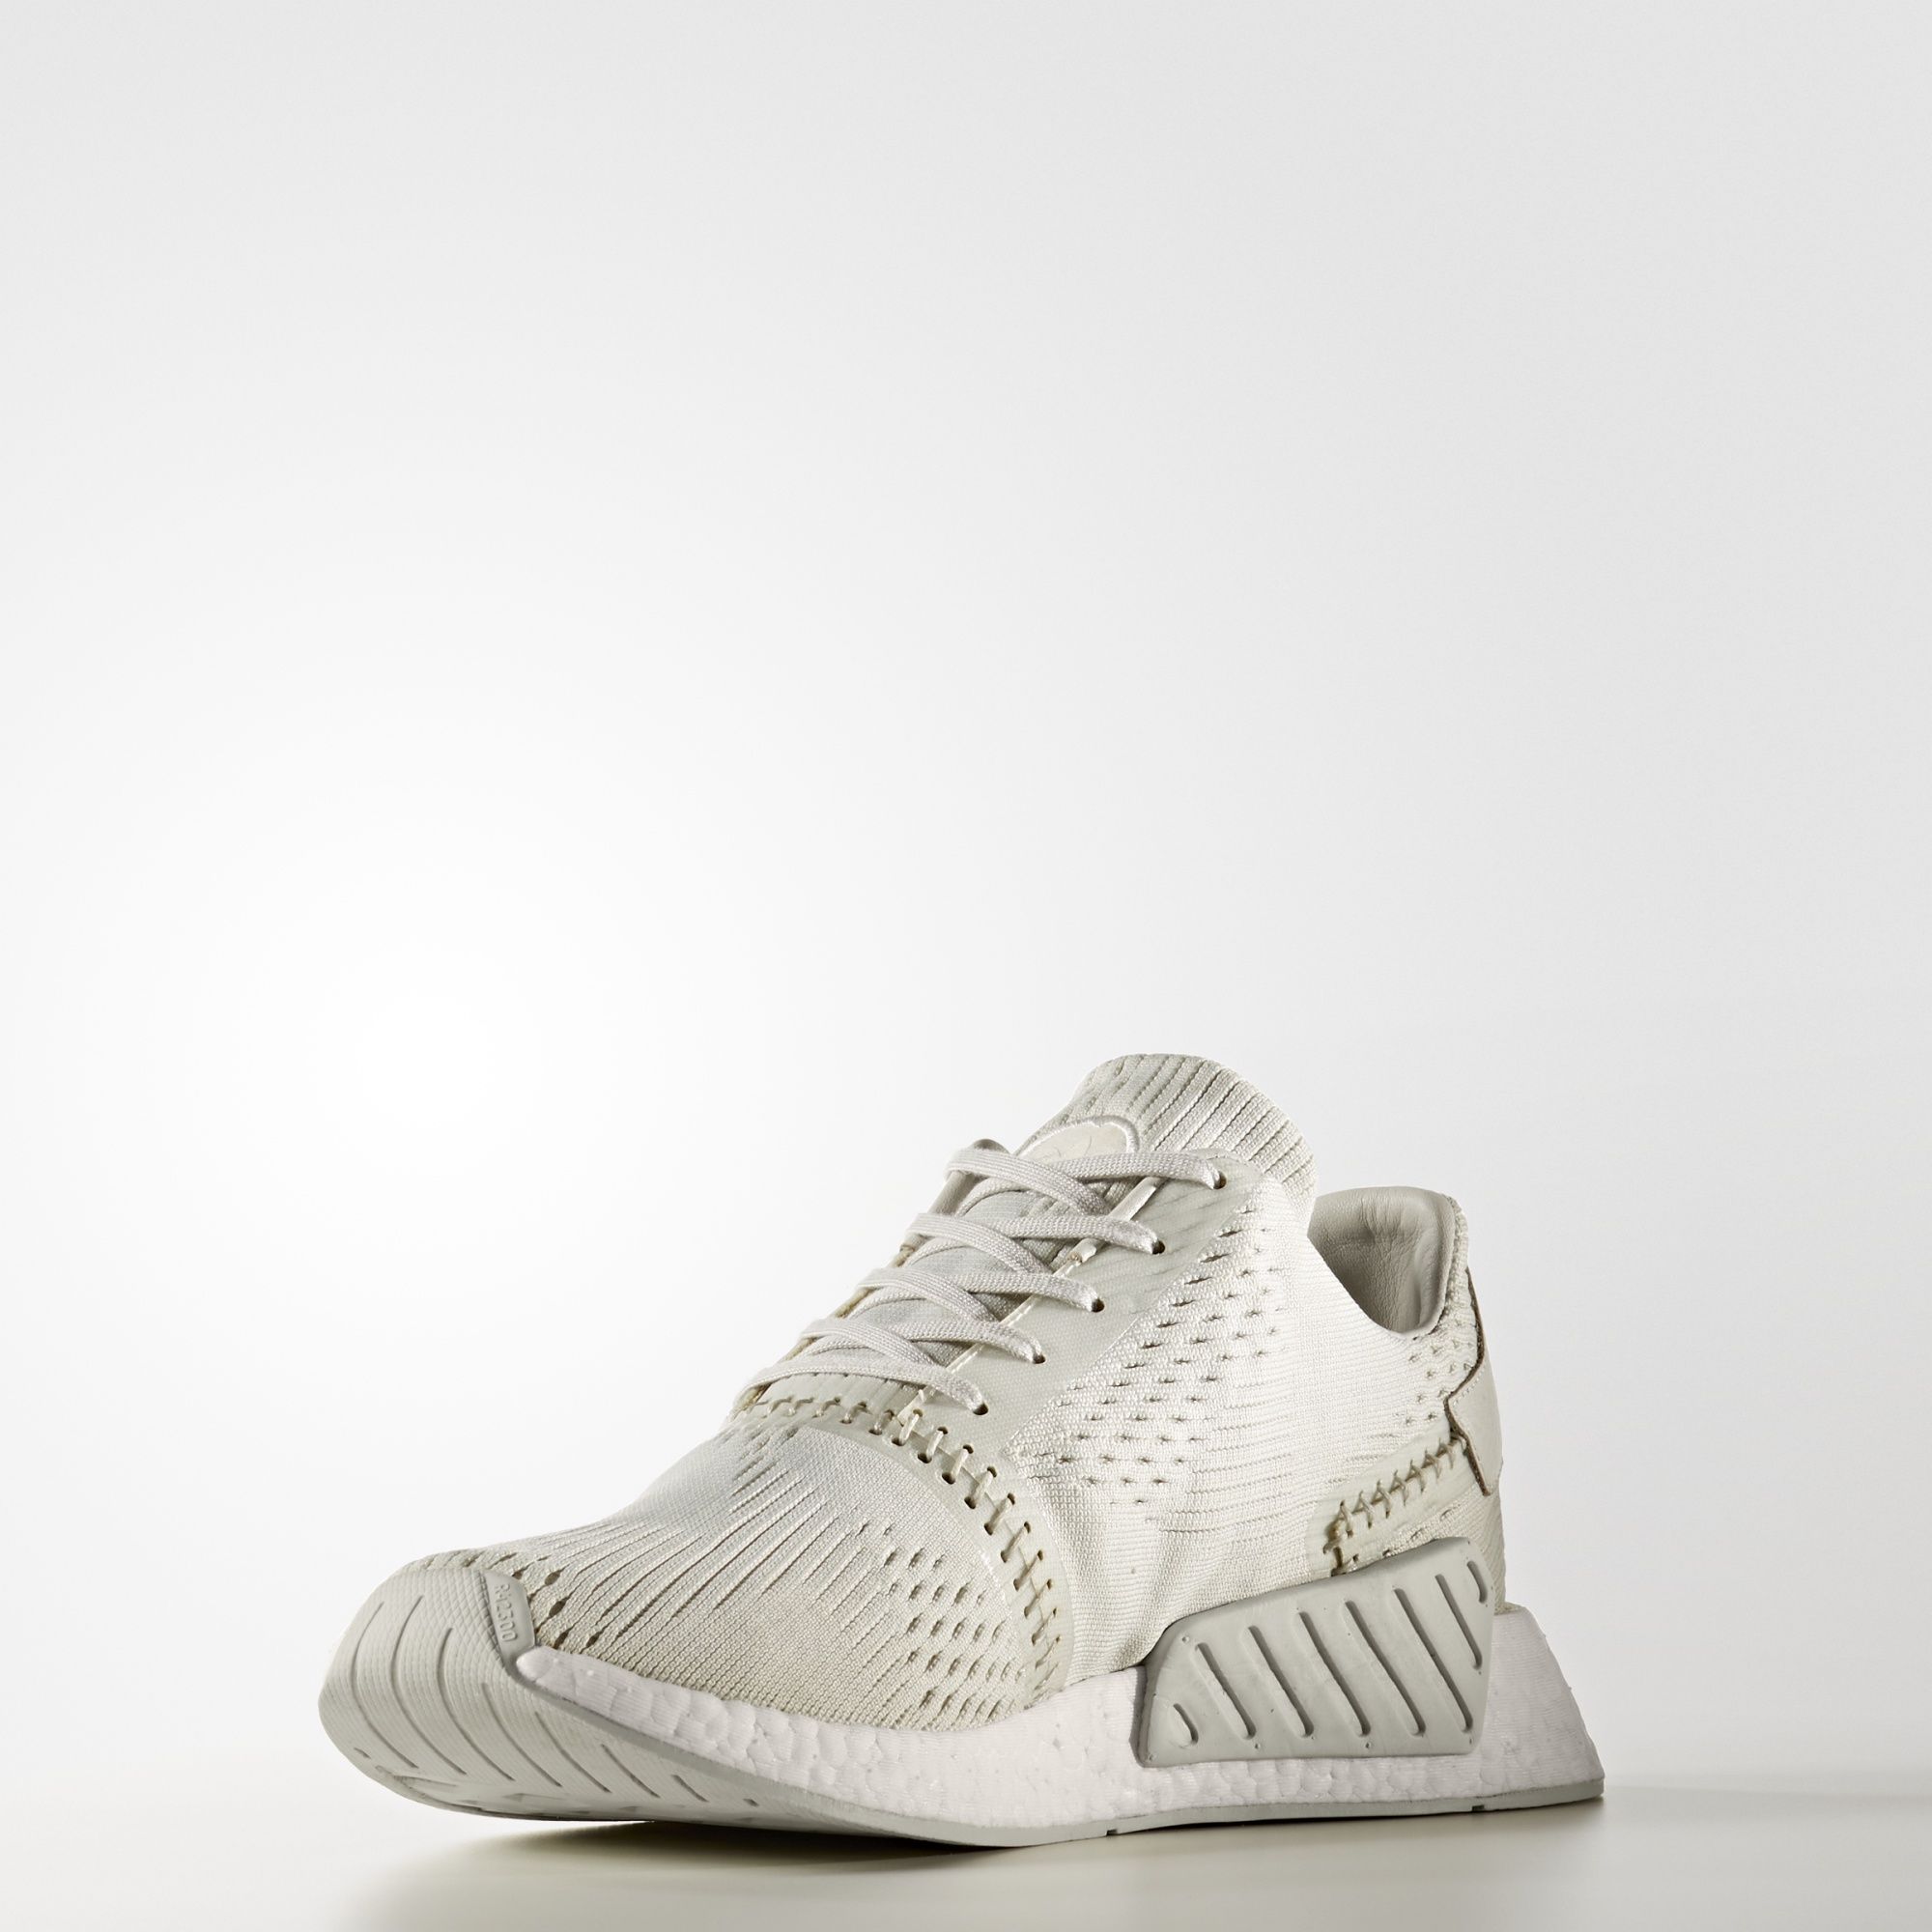 Adidas Originals by Wings + Horns 
NMD_R2 Primeknit Boost
Off-White / White